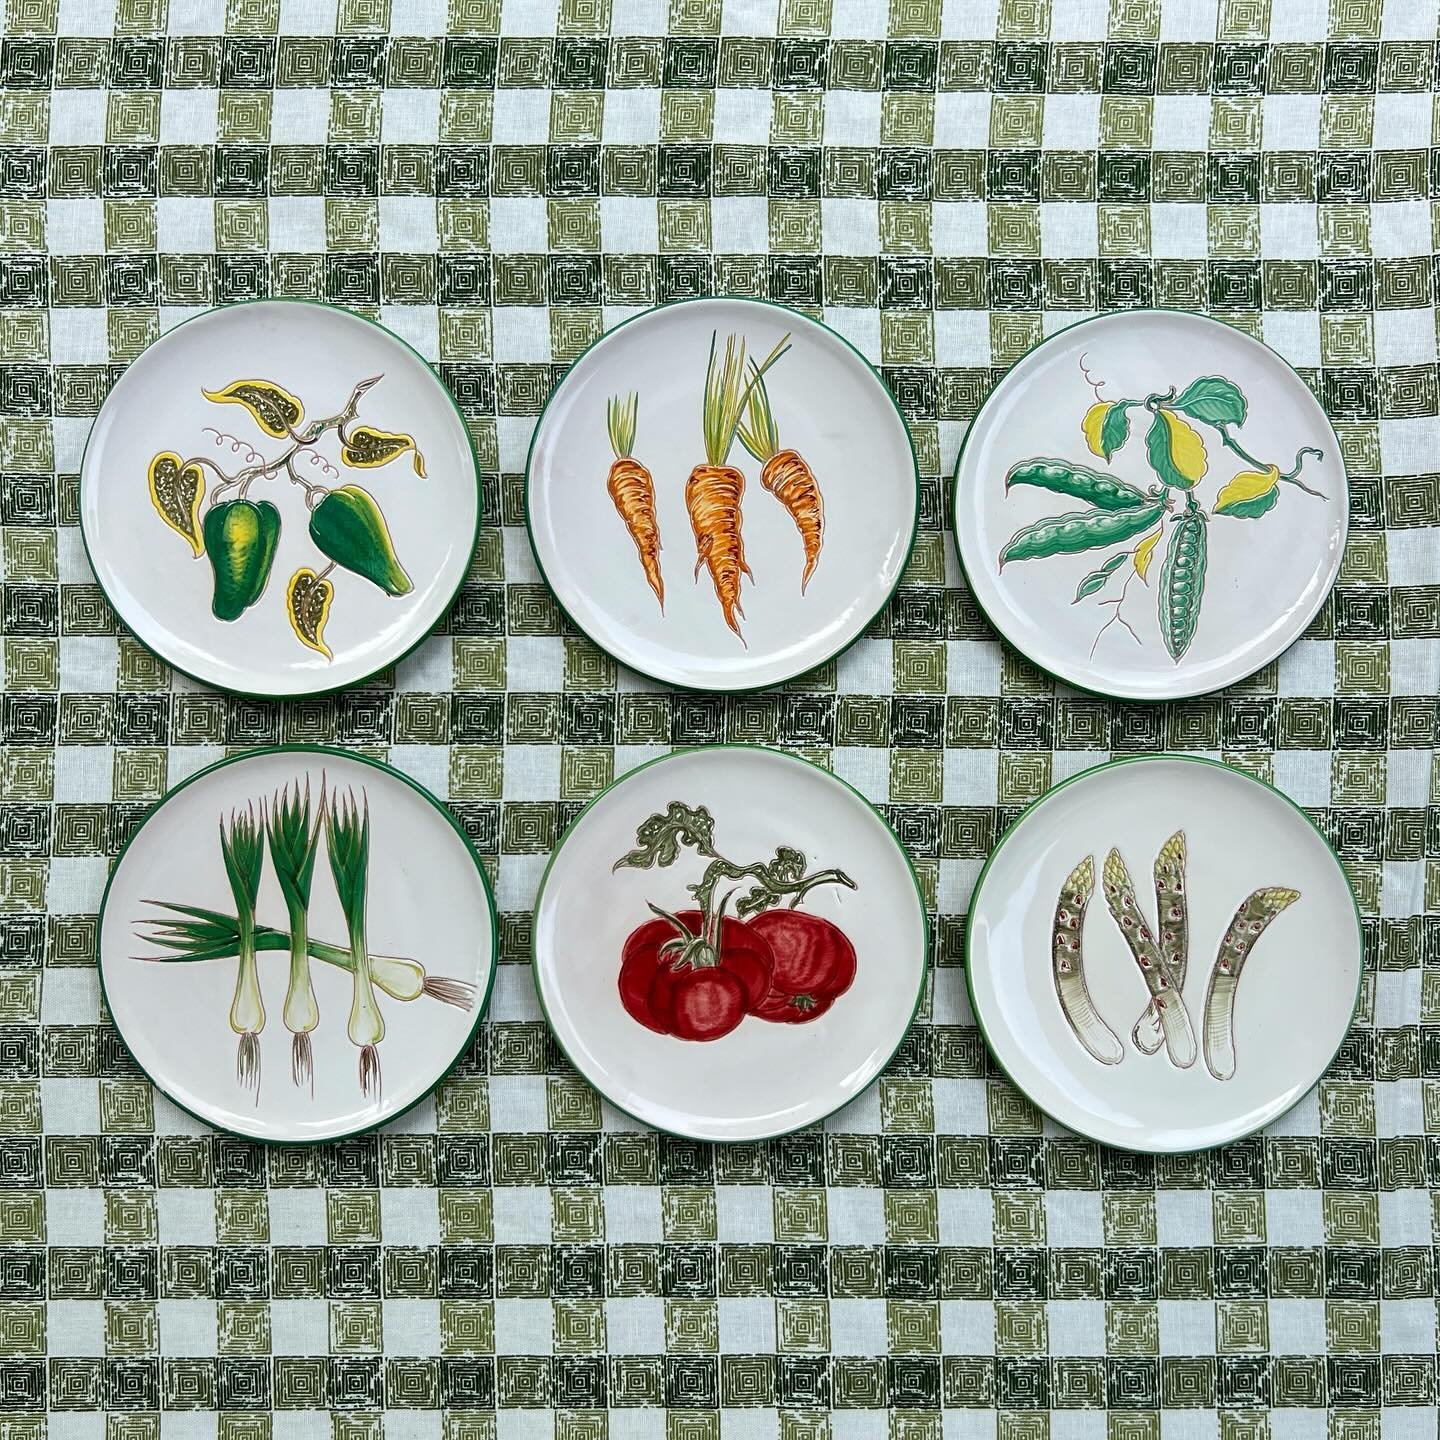 Freshly picked 🥕🫑🍅🫛 This vintage set of six vegetable plates from Italy is now available on the website for spring and summer entertaining!